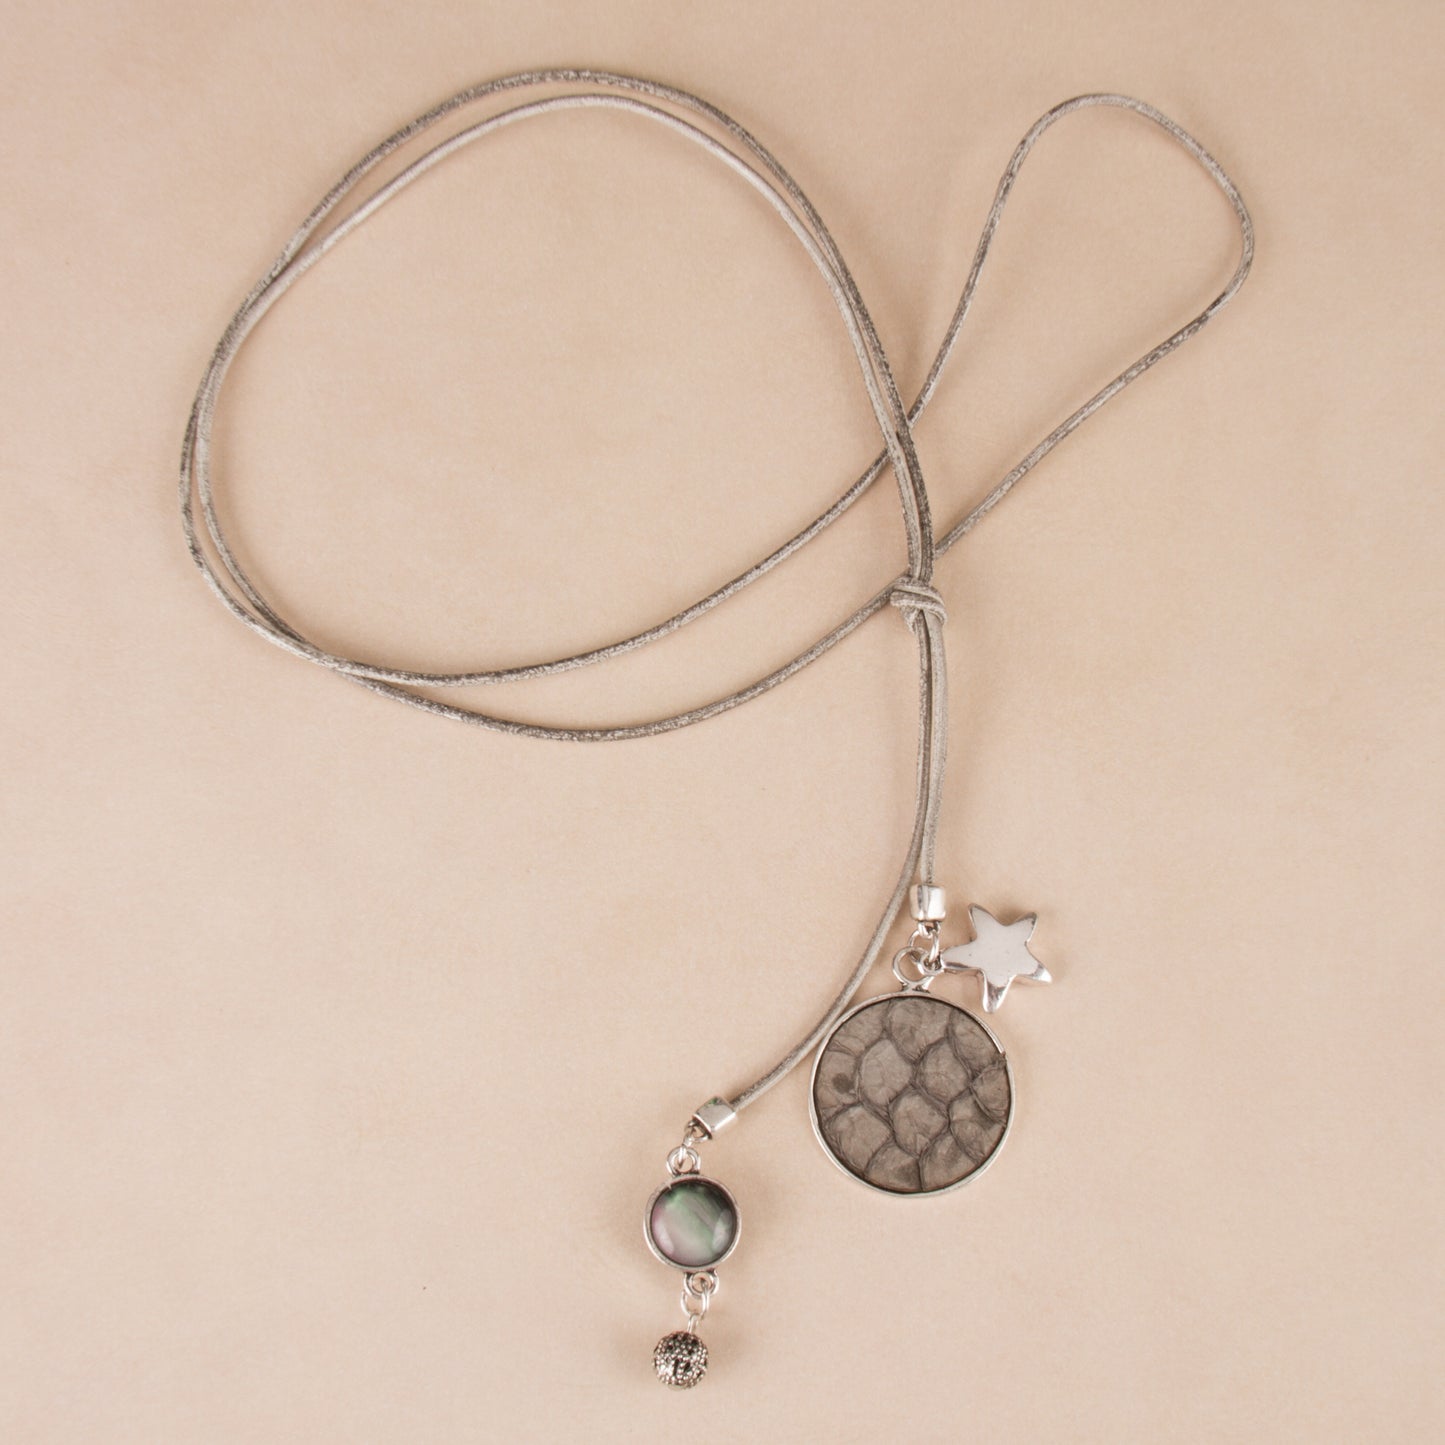 N3267-GY 36" Lariat Necklace with python embossed disk